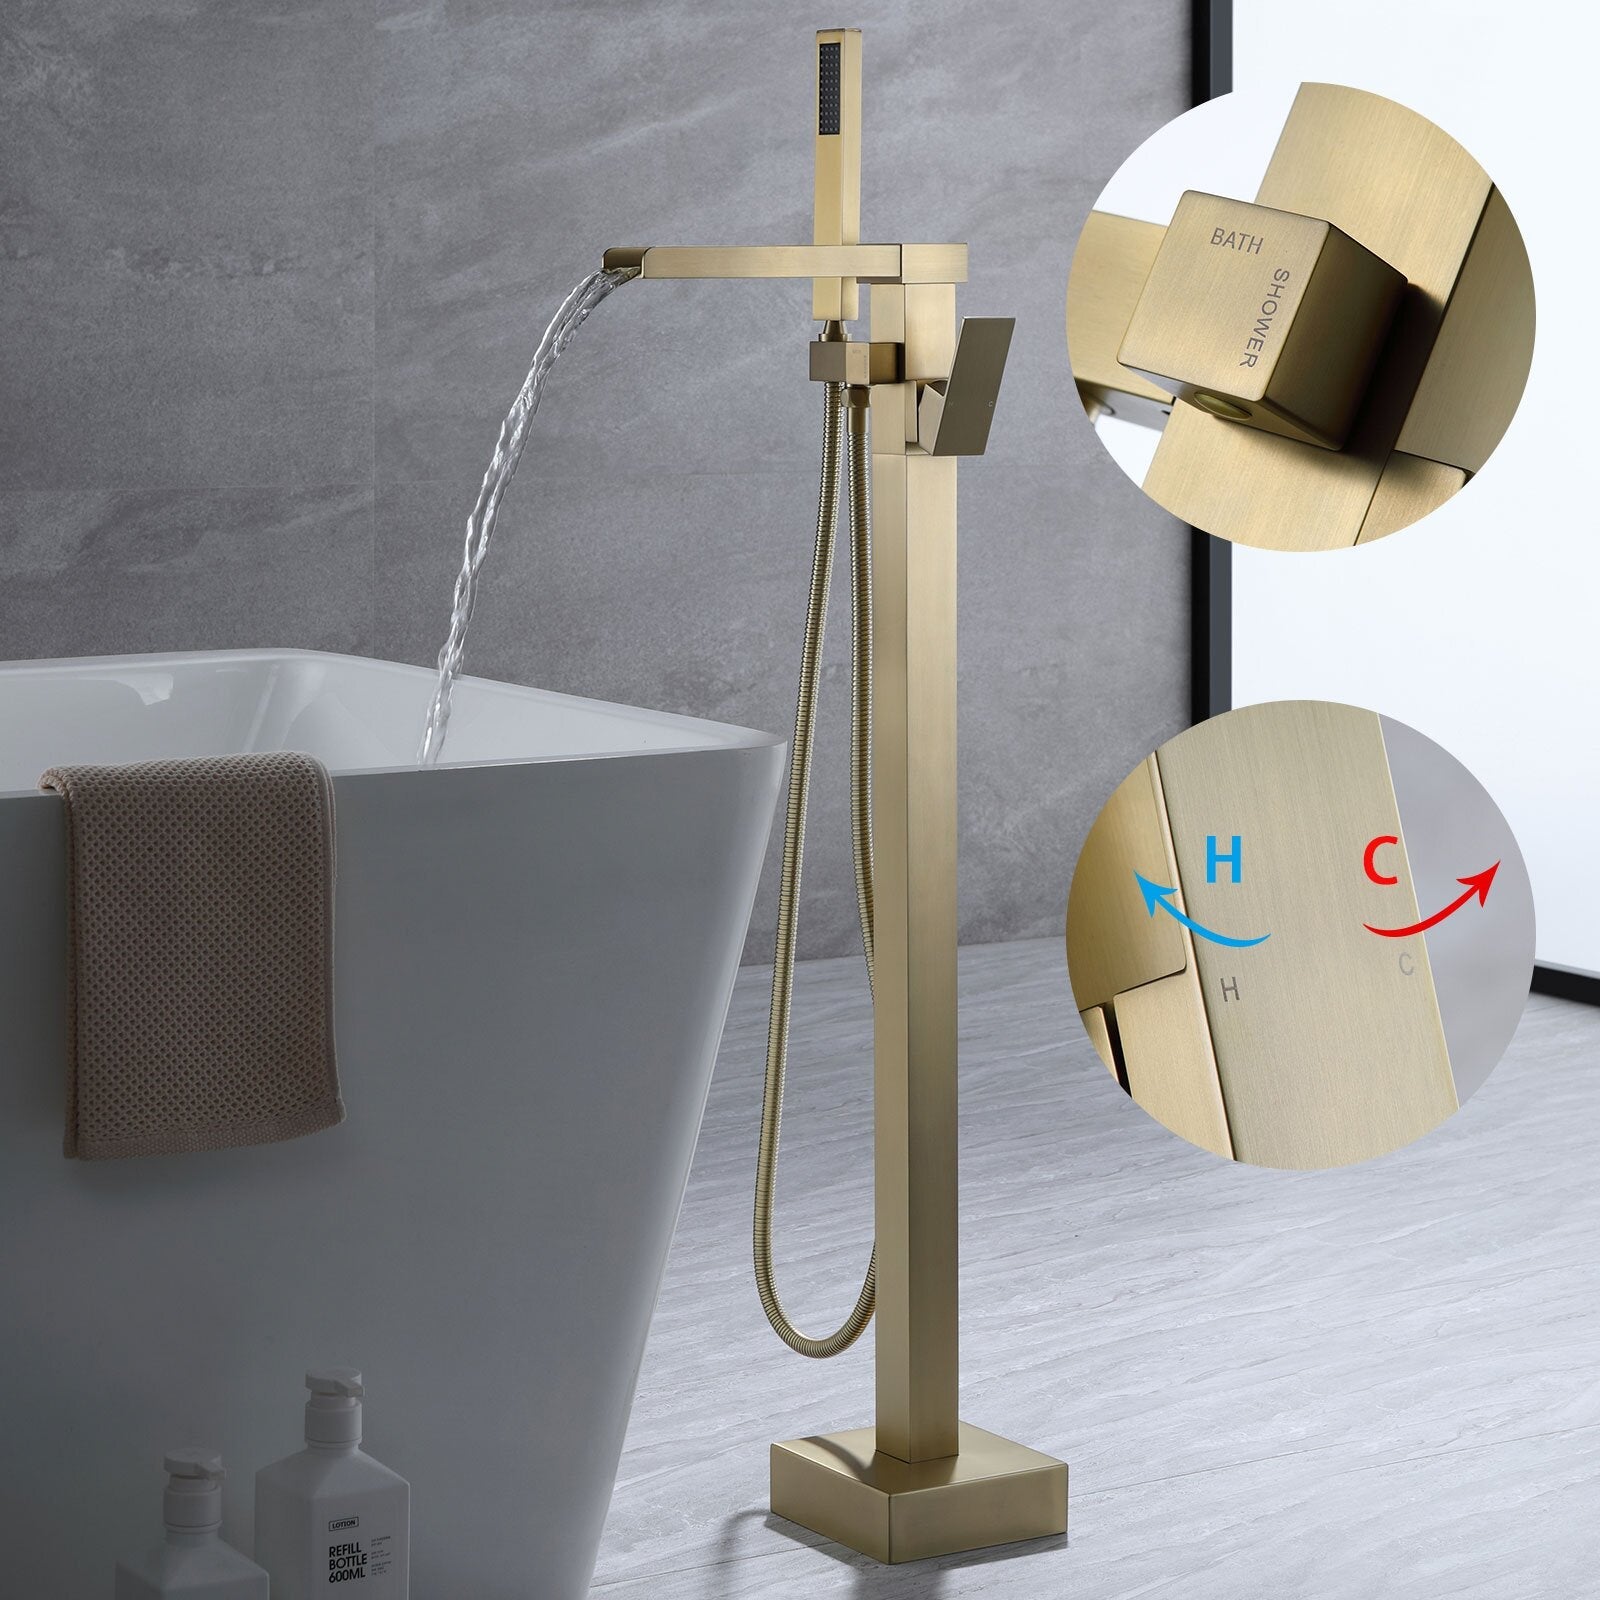 Yonoly Single Handle Freestanding Tub Filler with Handheld in Brush Gold